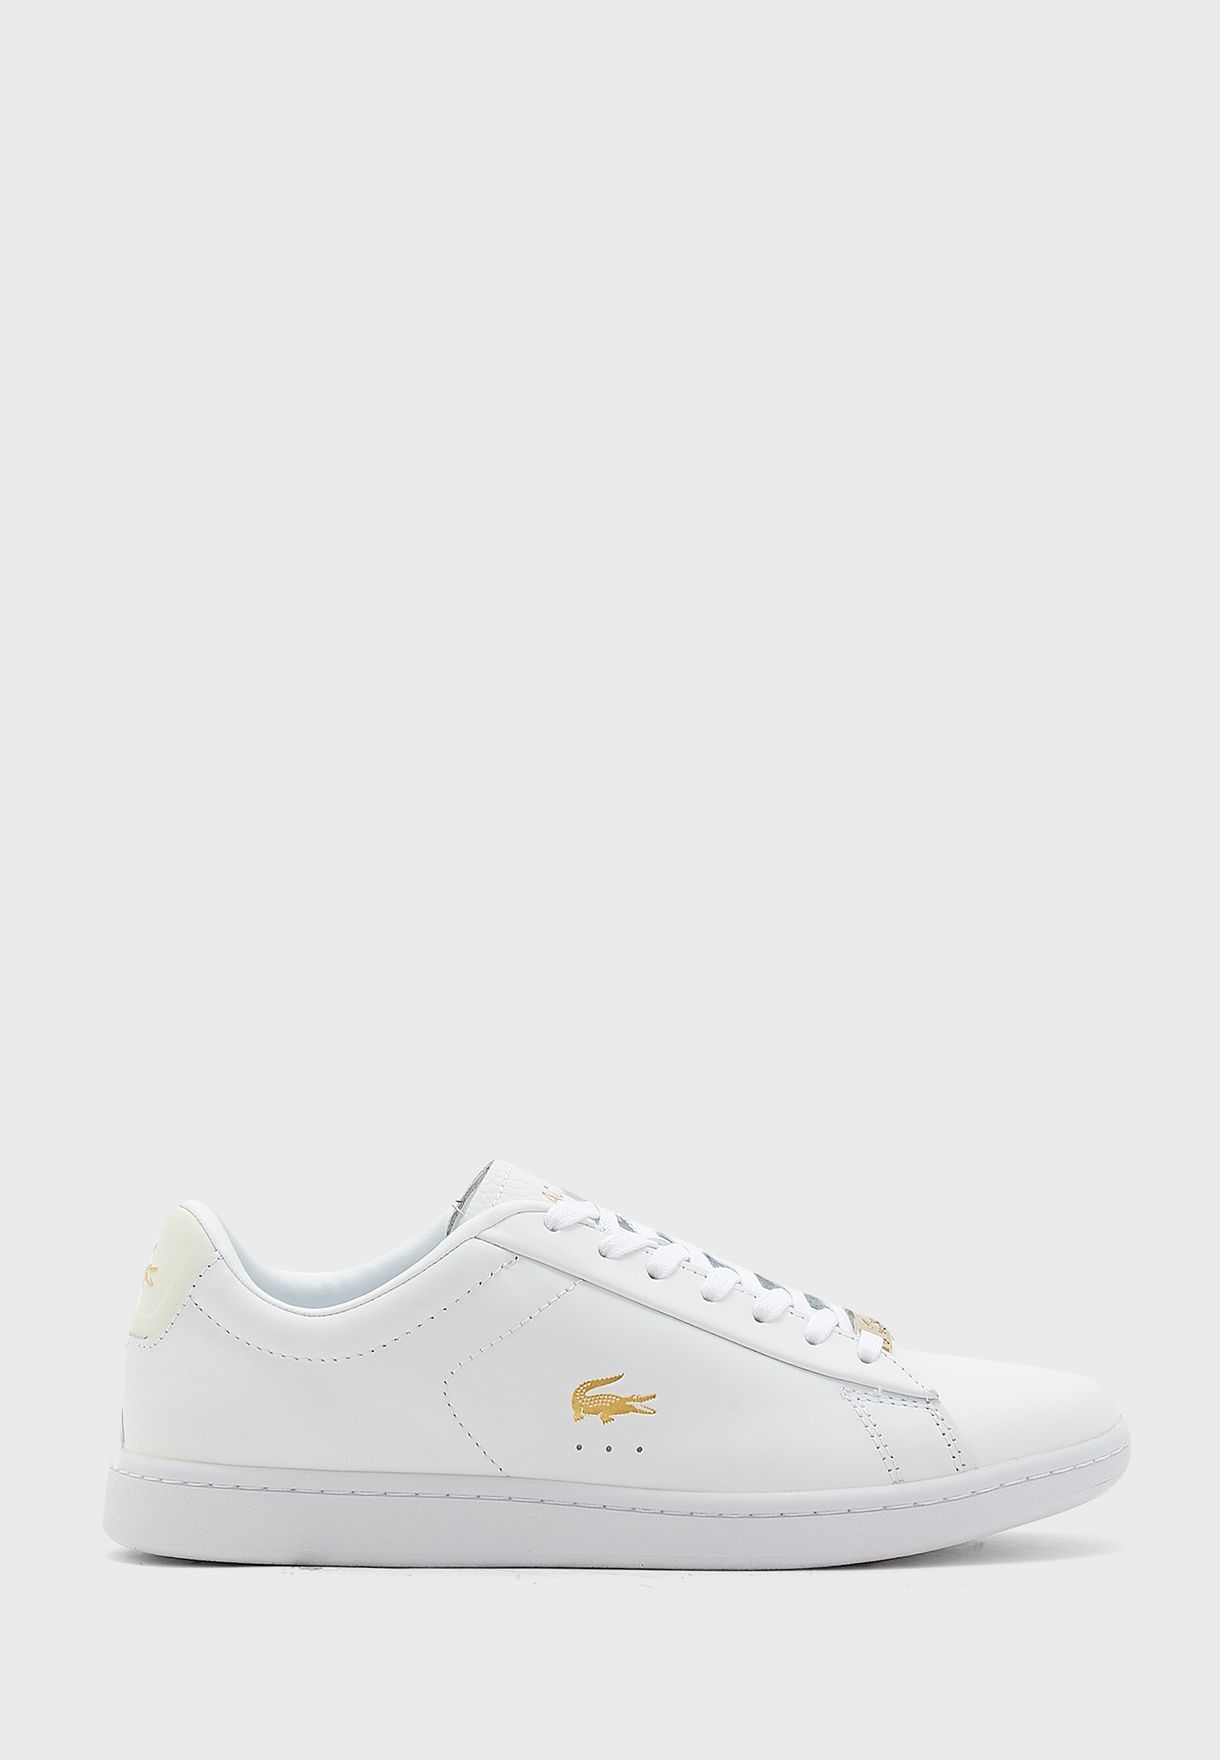 Carnaby Evo 0722 1 Sneakers